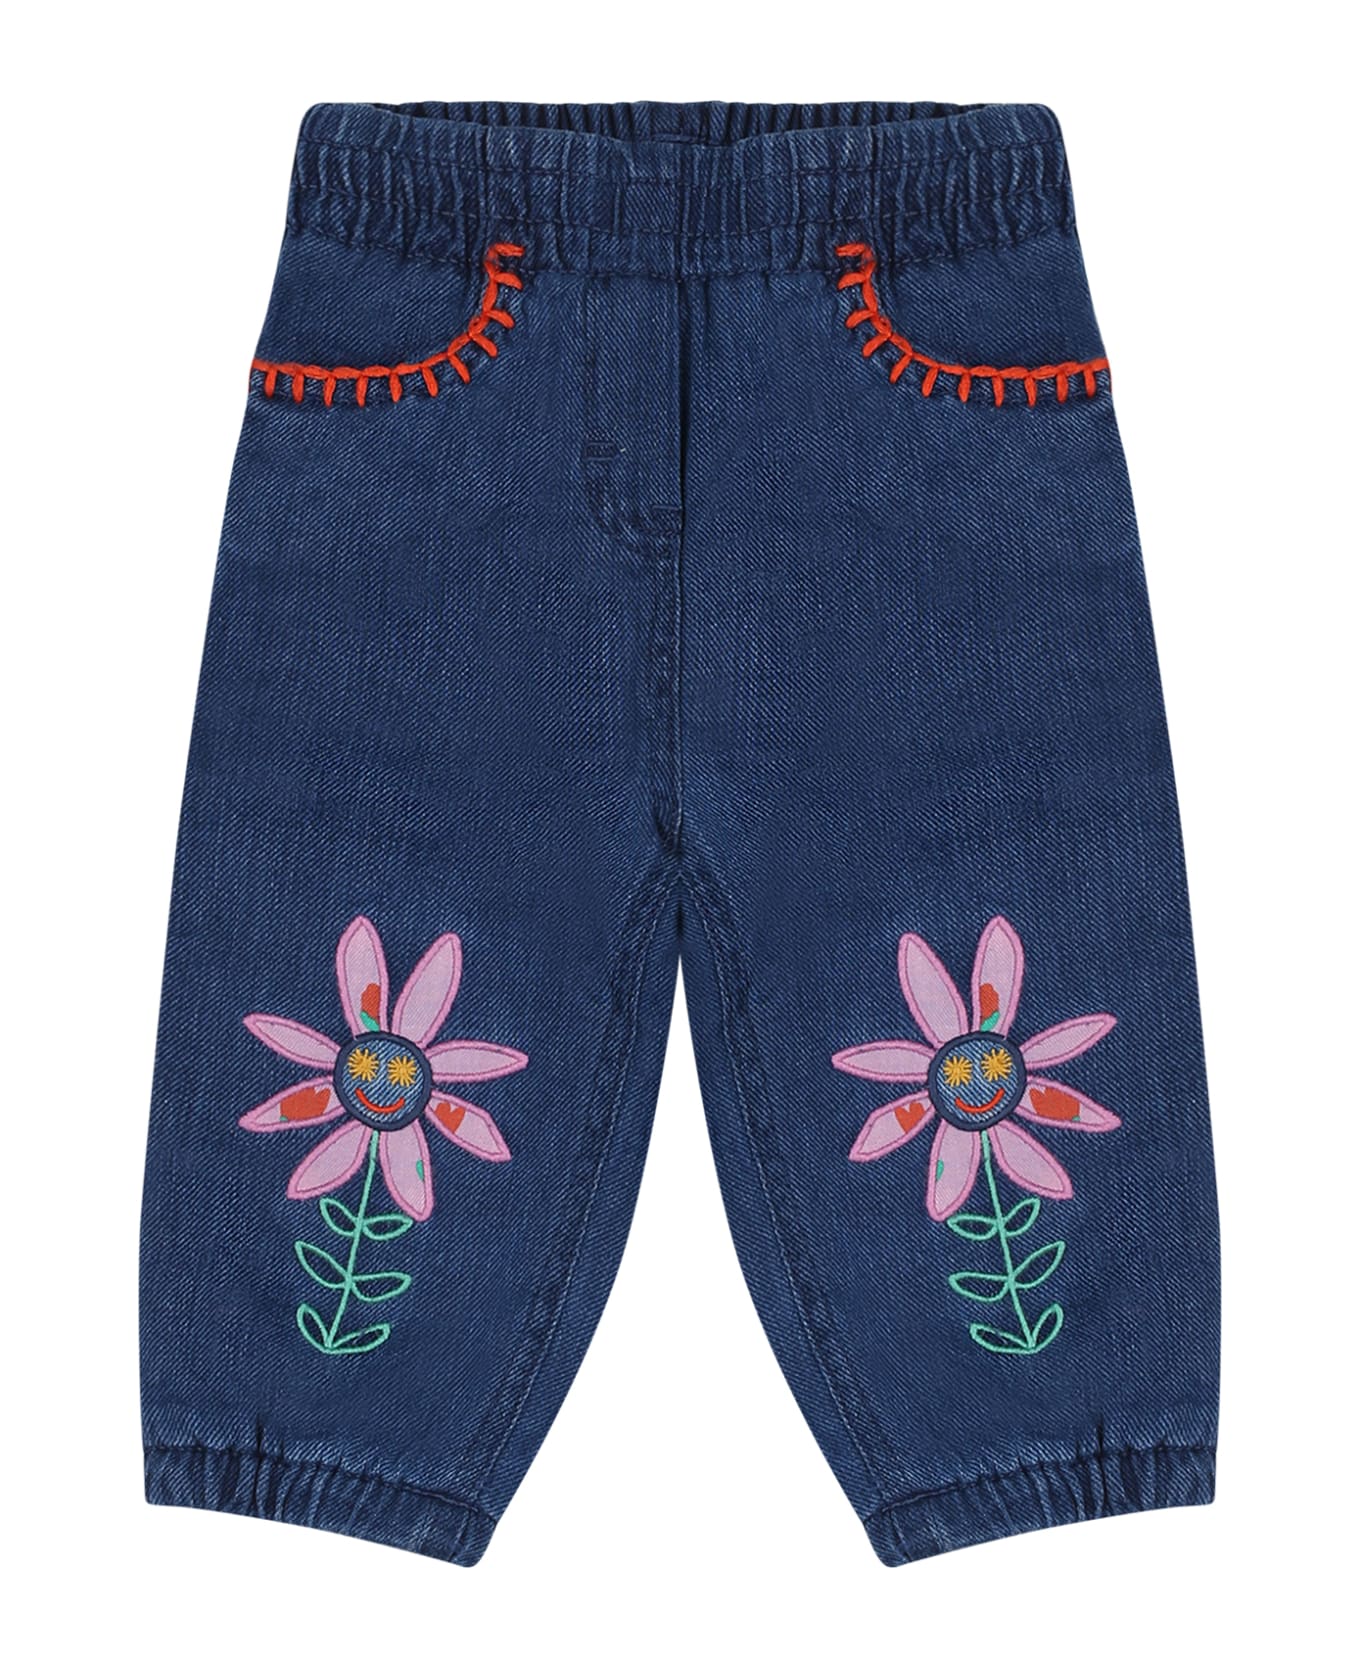 Stella McCartney Kids Blue Jeans For Baby Girl With Flowers - Blue